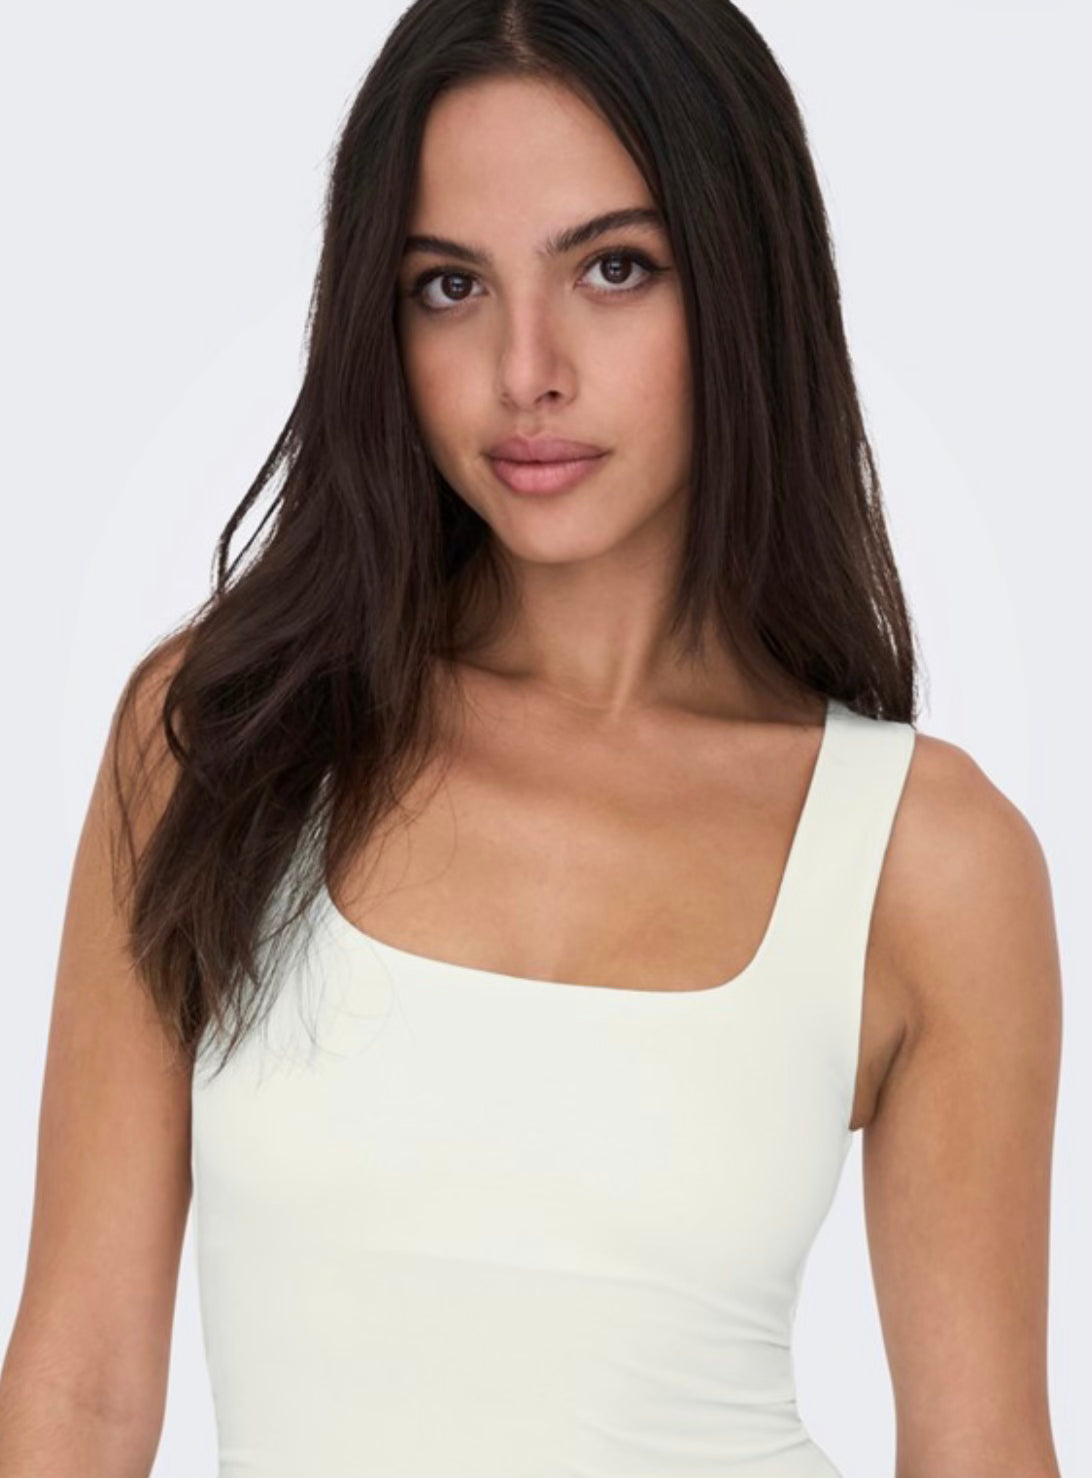 ONLY - LEA S/L 2-WAYS FIT TOP - WHITE